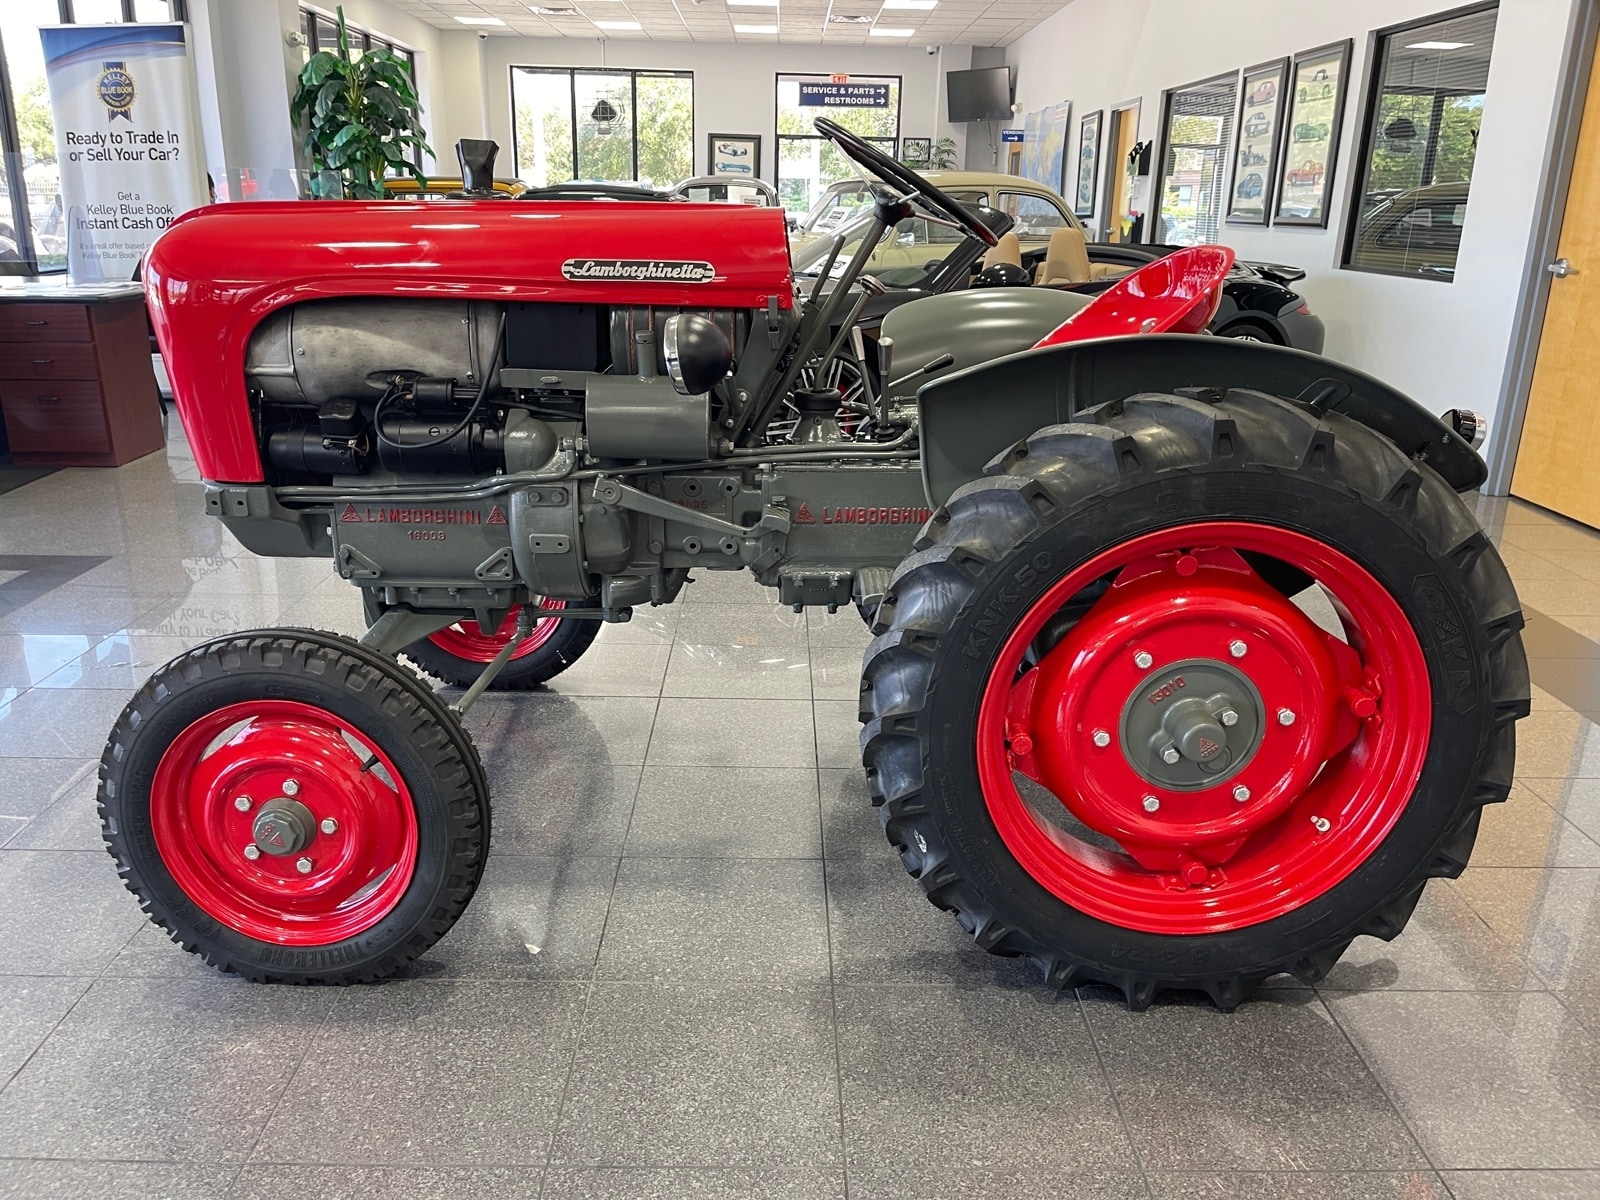 Used 1958 Lamborghini Tractor Lamborghineta Tractor - (Collector Series)  For Sale in Jacksonville FL | World Imports USA/Lotus of Jacksonville  Serving San Marco, Ponte Vedra Beach & Palm Valley | VIN: XXXXXXXXXX1866A